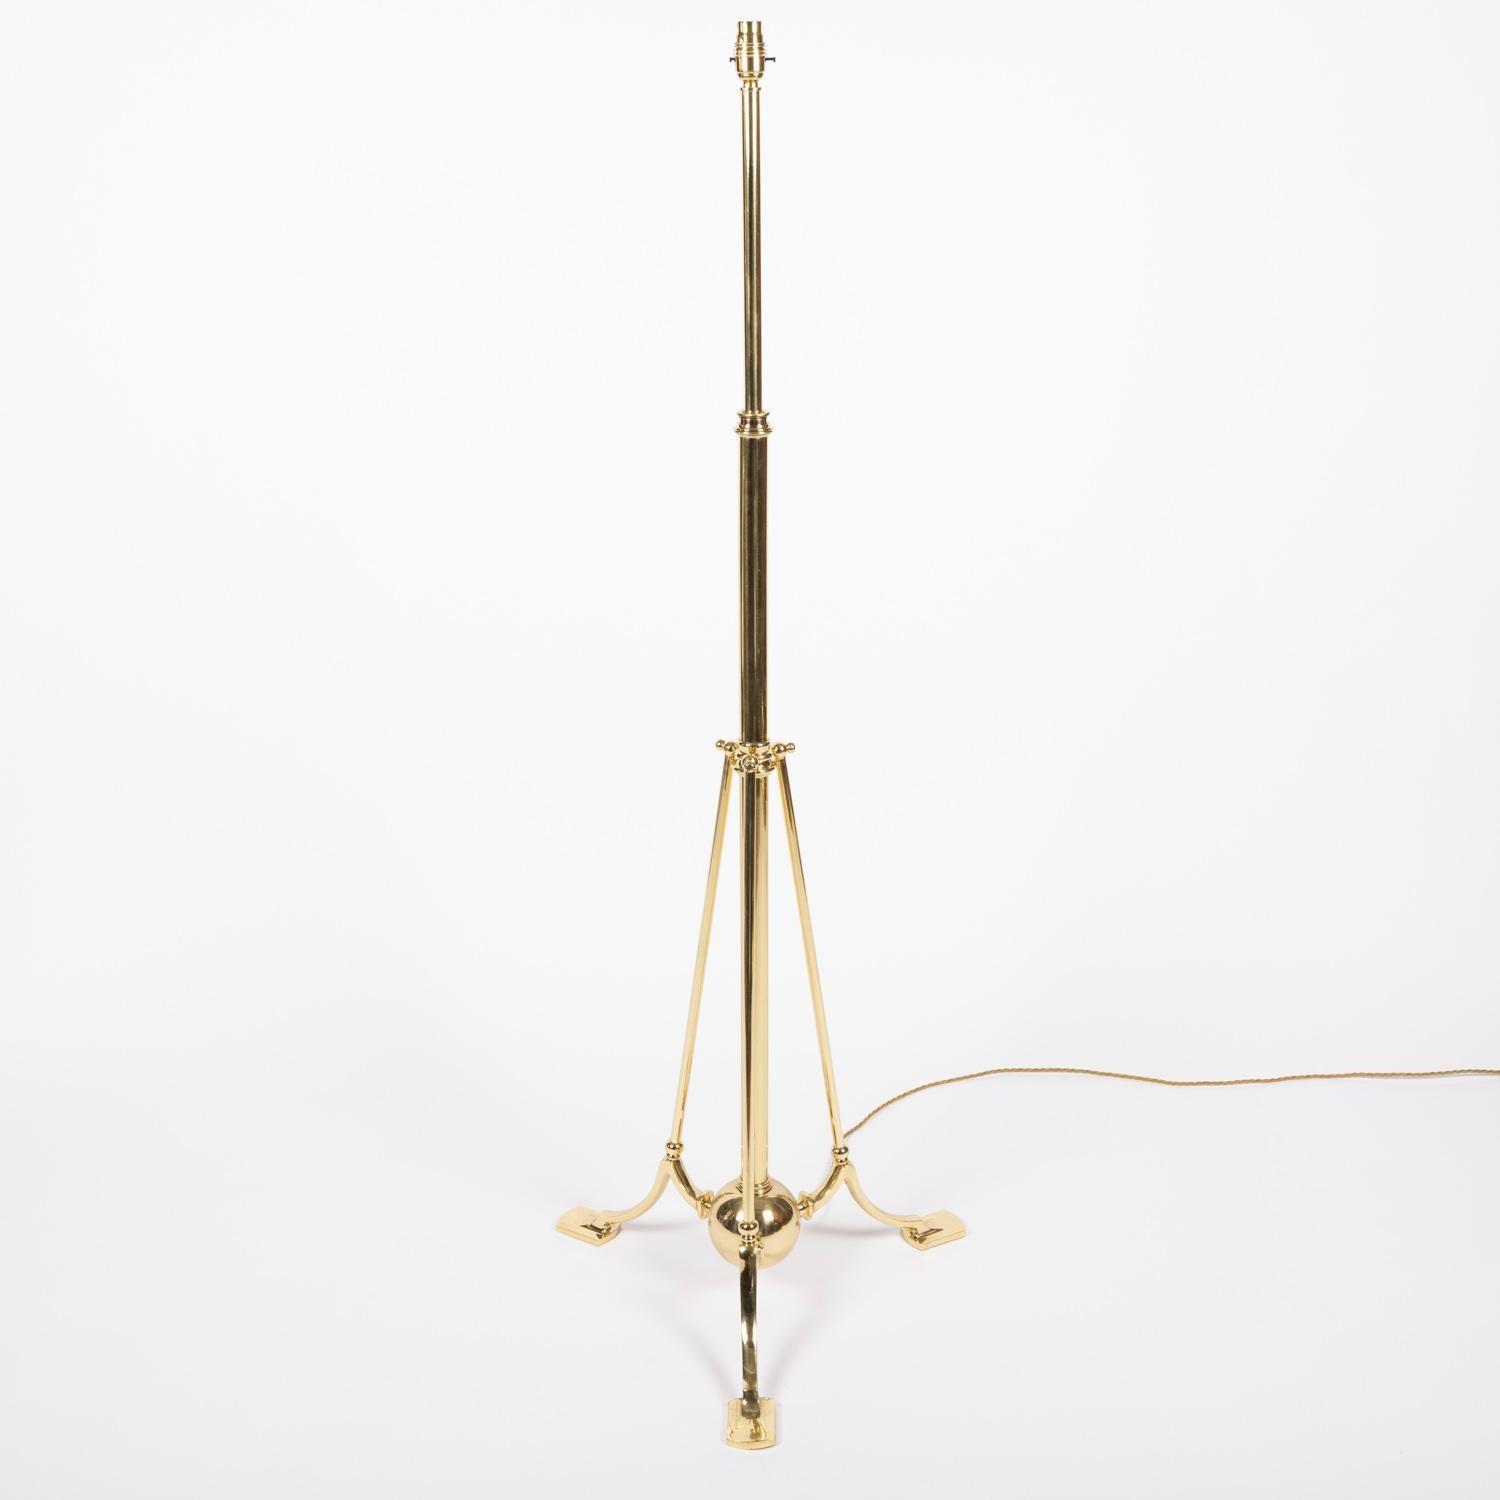 A brass telescopic standard lamp, tripod base, with ball weight, in the manner of W.A.S Benson. circa 1900.

Height in photographs: 56 inches / 142 cm. (adjustable height).

Re-wired and tested.